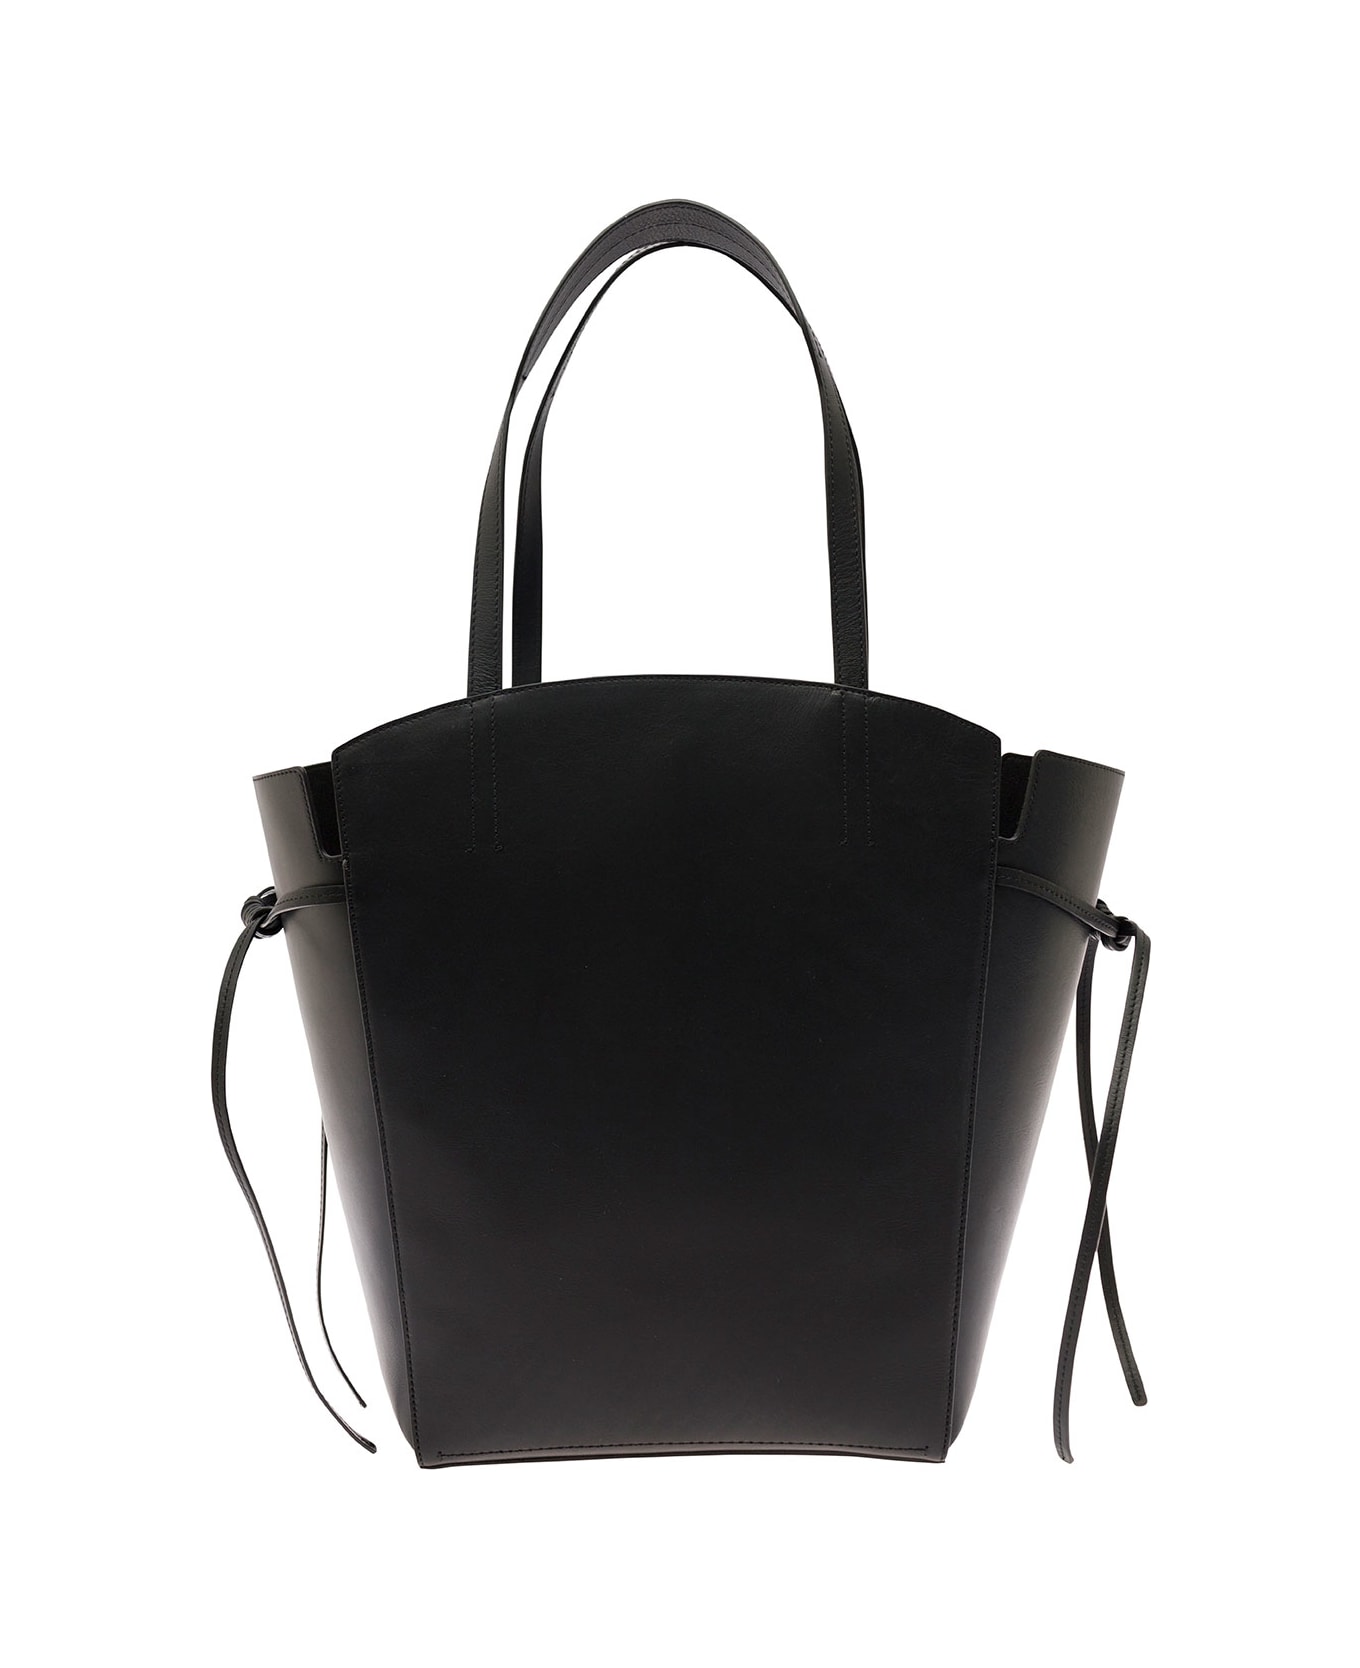 Mulberry 'clovelly' Black Shoulder Bag With Laminated Logo In Smooth Leather Woman - Black トートバッグ